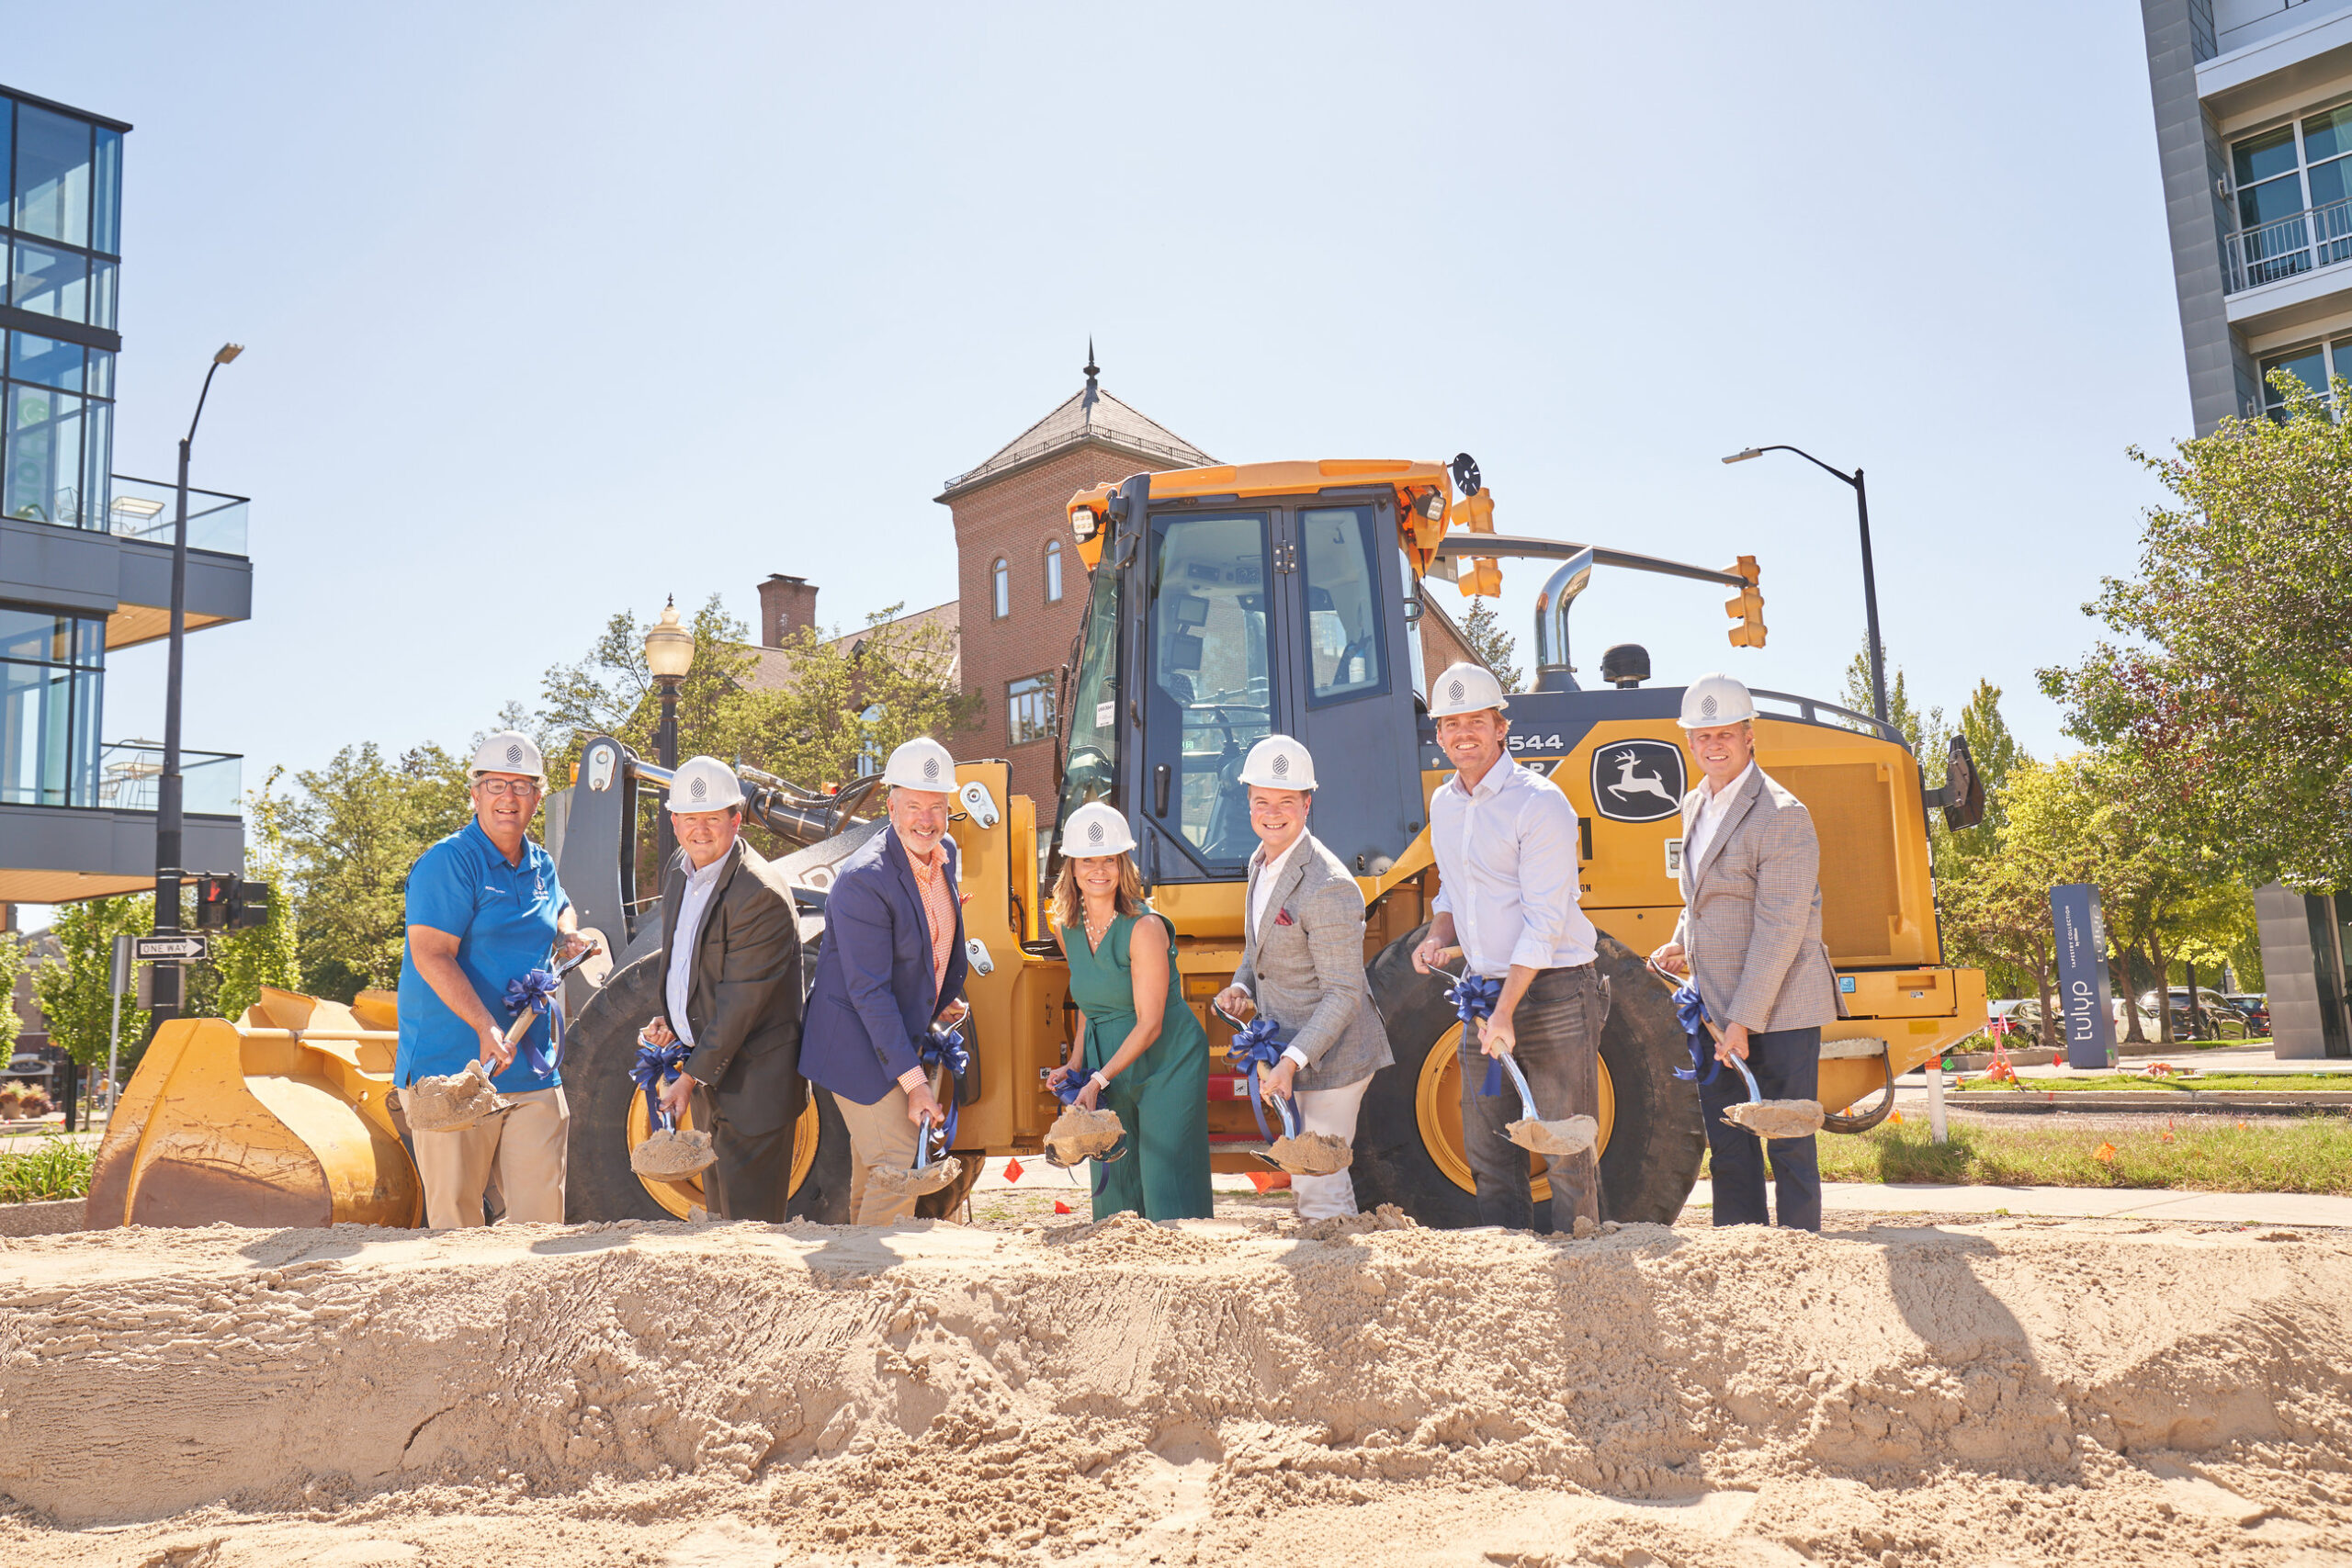 Next Center Groundbreaking Speakers with shovels in front of a piece of heavy equipment 